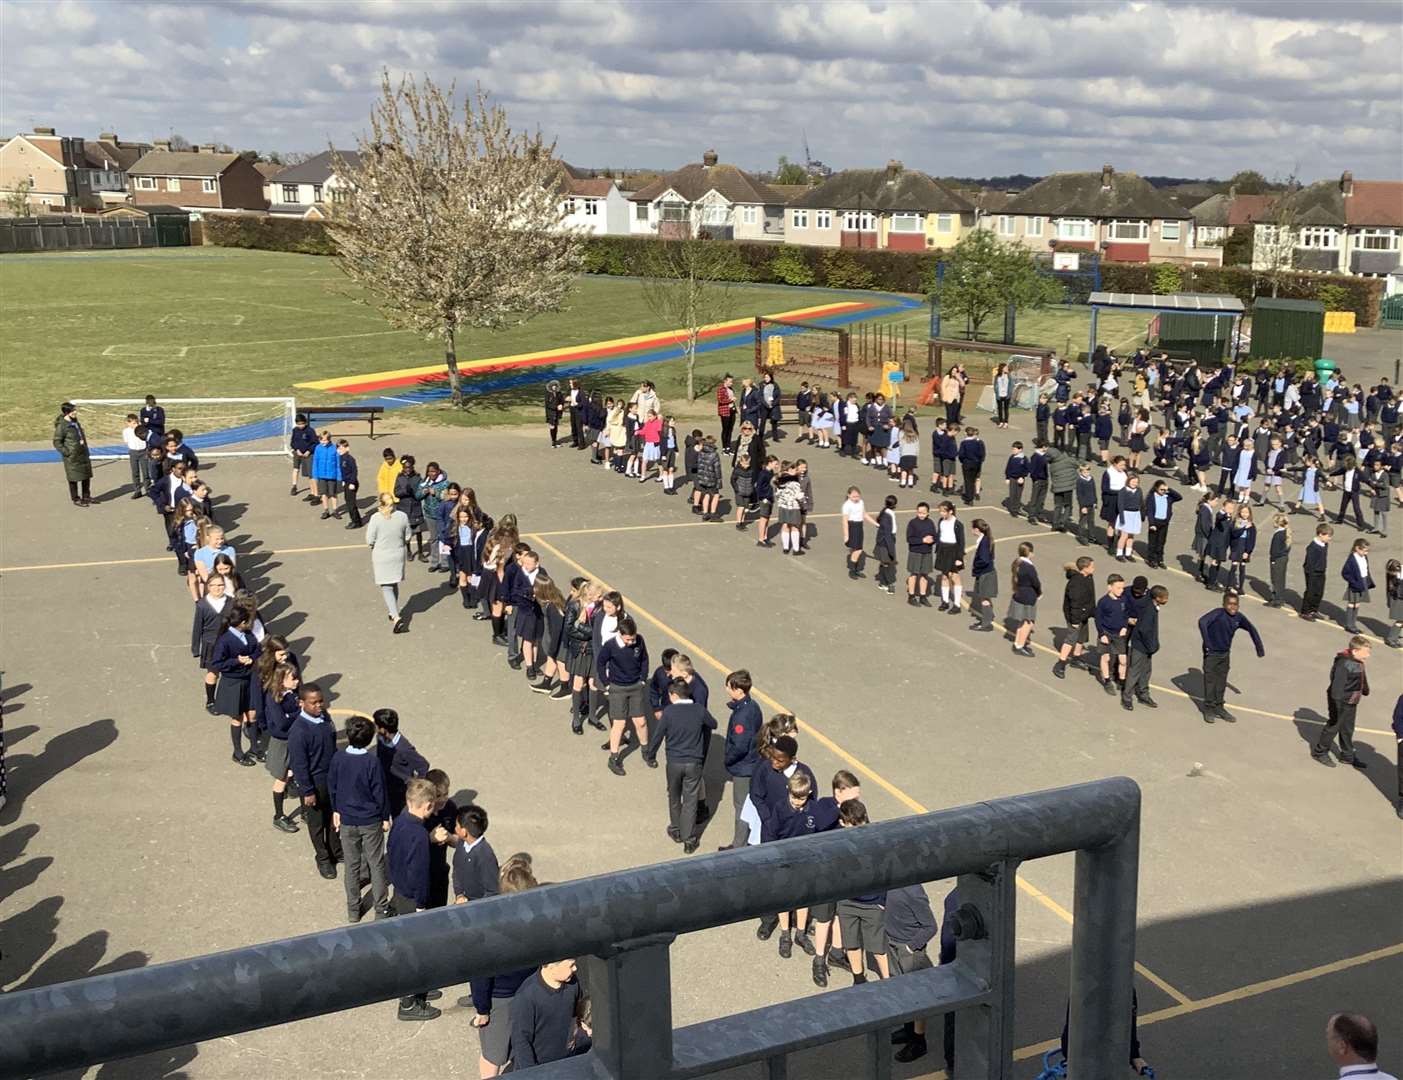 Students at Wentworth Primary School in Dartford came together for a "flash mob-style" dance to mark International Dance Day